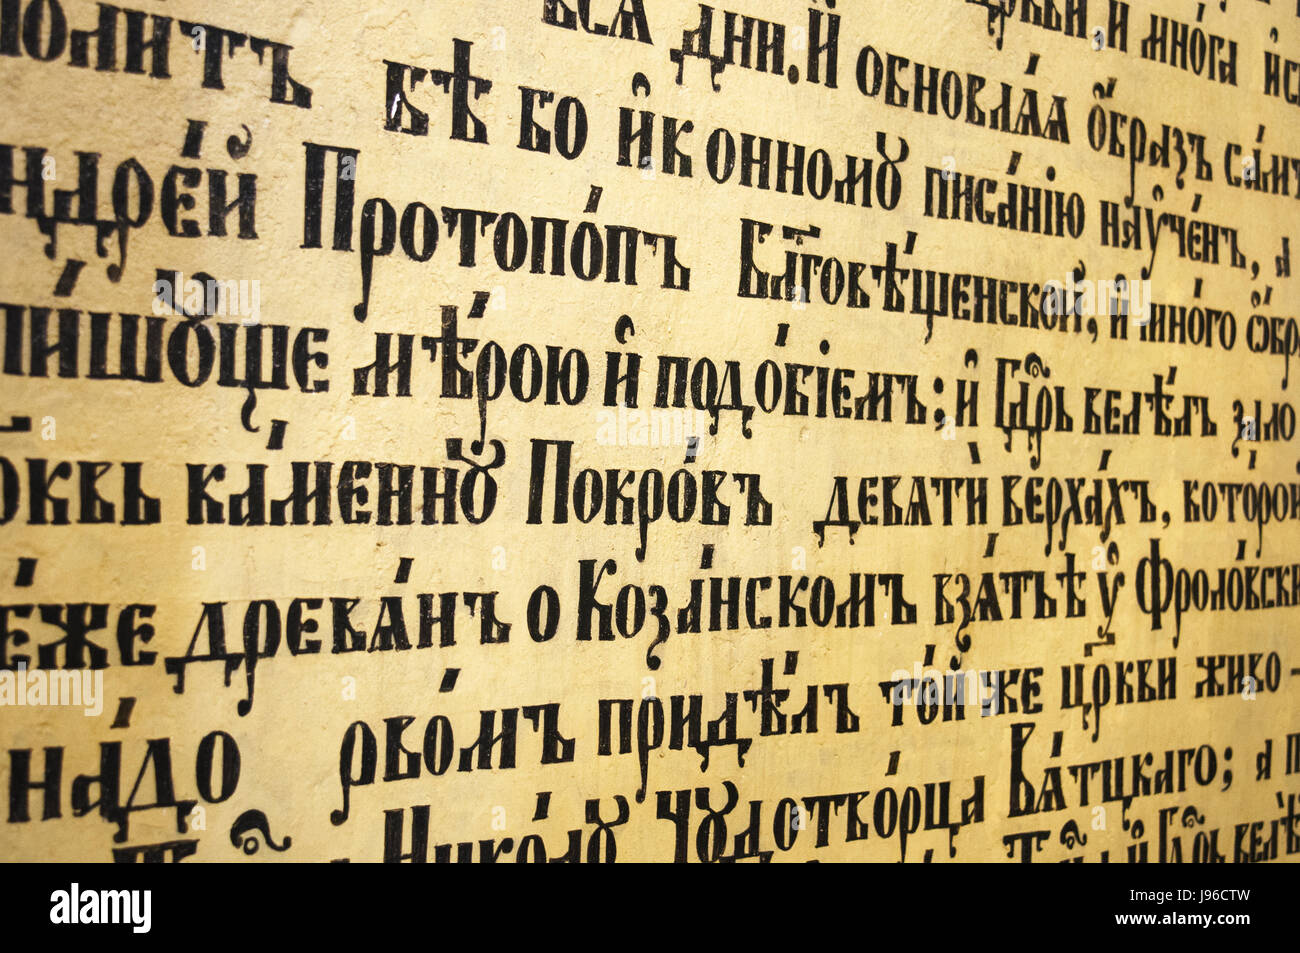 Moscow: Greek Orthodox writings on the wall of Church of the Velikoretsky image of St.Nicholas, the southern church part of Saint Basil's Cathedral Stock Photo